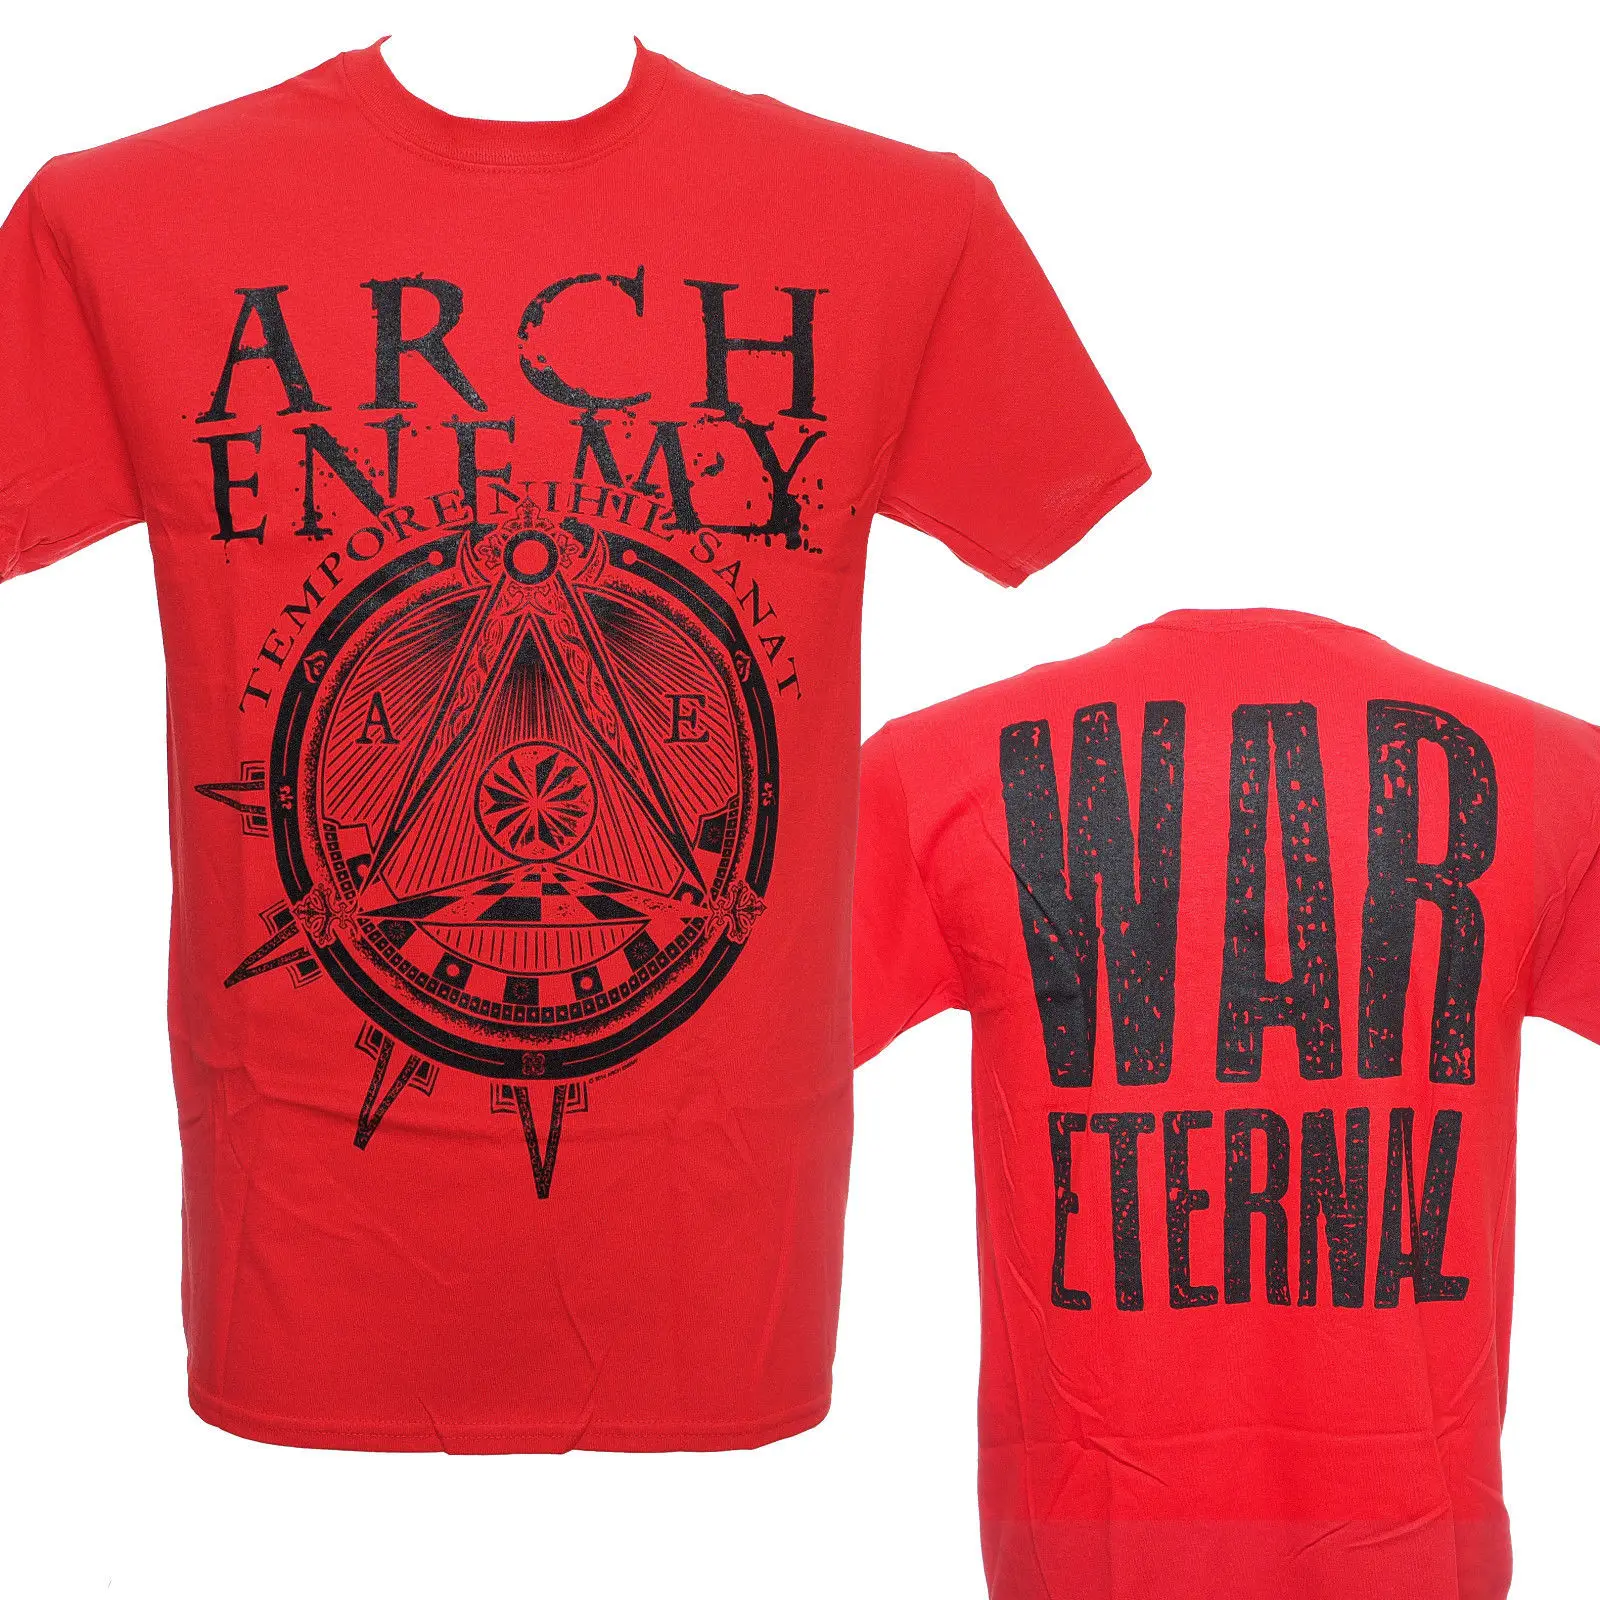 

ARCH ENEMY - WAR ETERNAL RED - Official Licensed T-Shirt - METAL - New S M XL Cotton T-Shirts Fashion Free Shipping